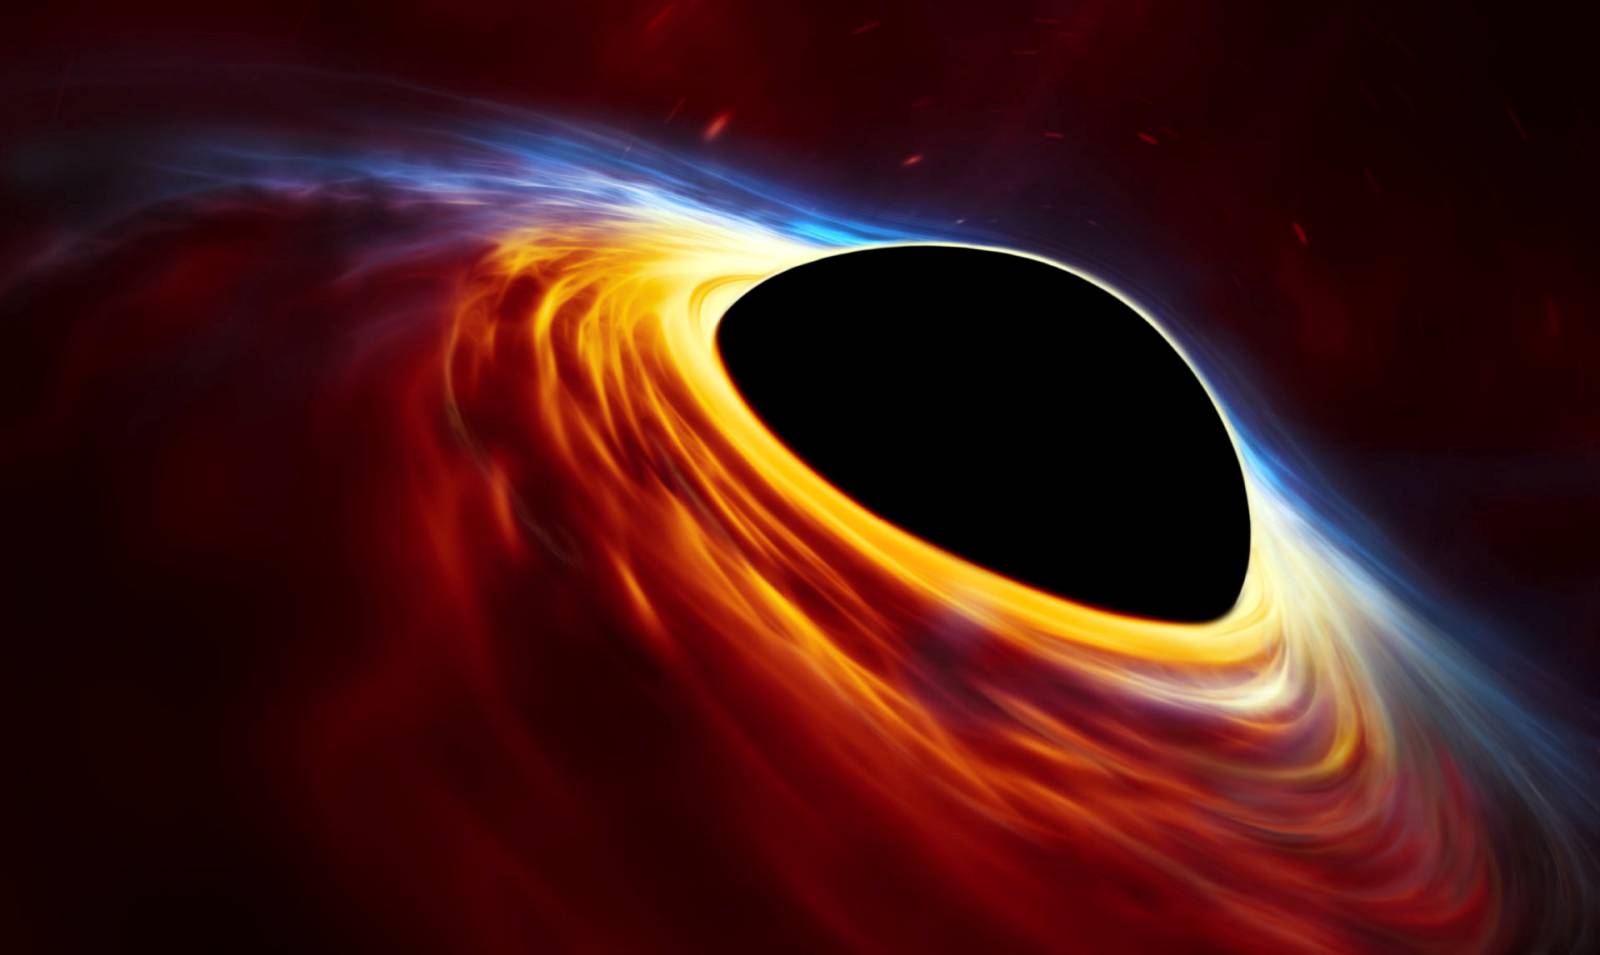 The Black Hole. FIRST VIDEO Clip Announced to the AWESOME of the World